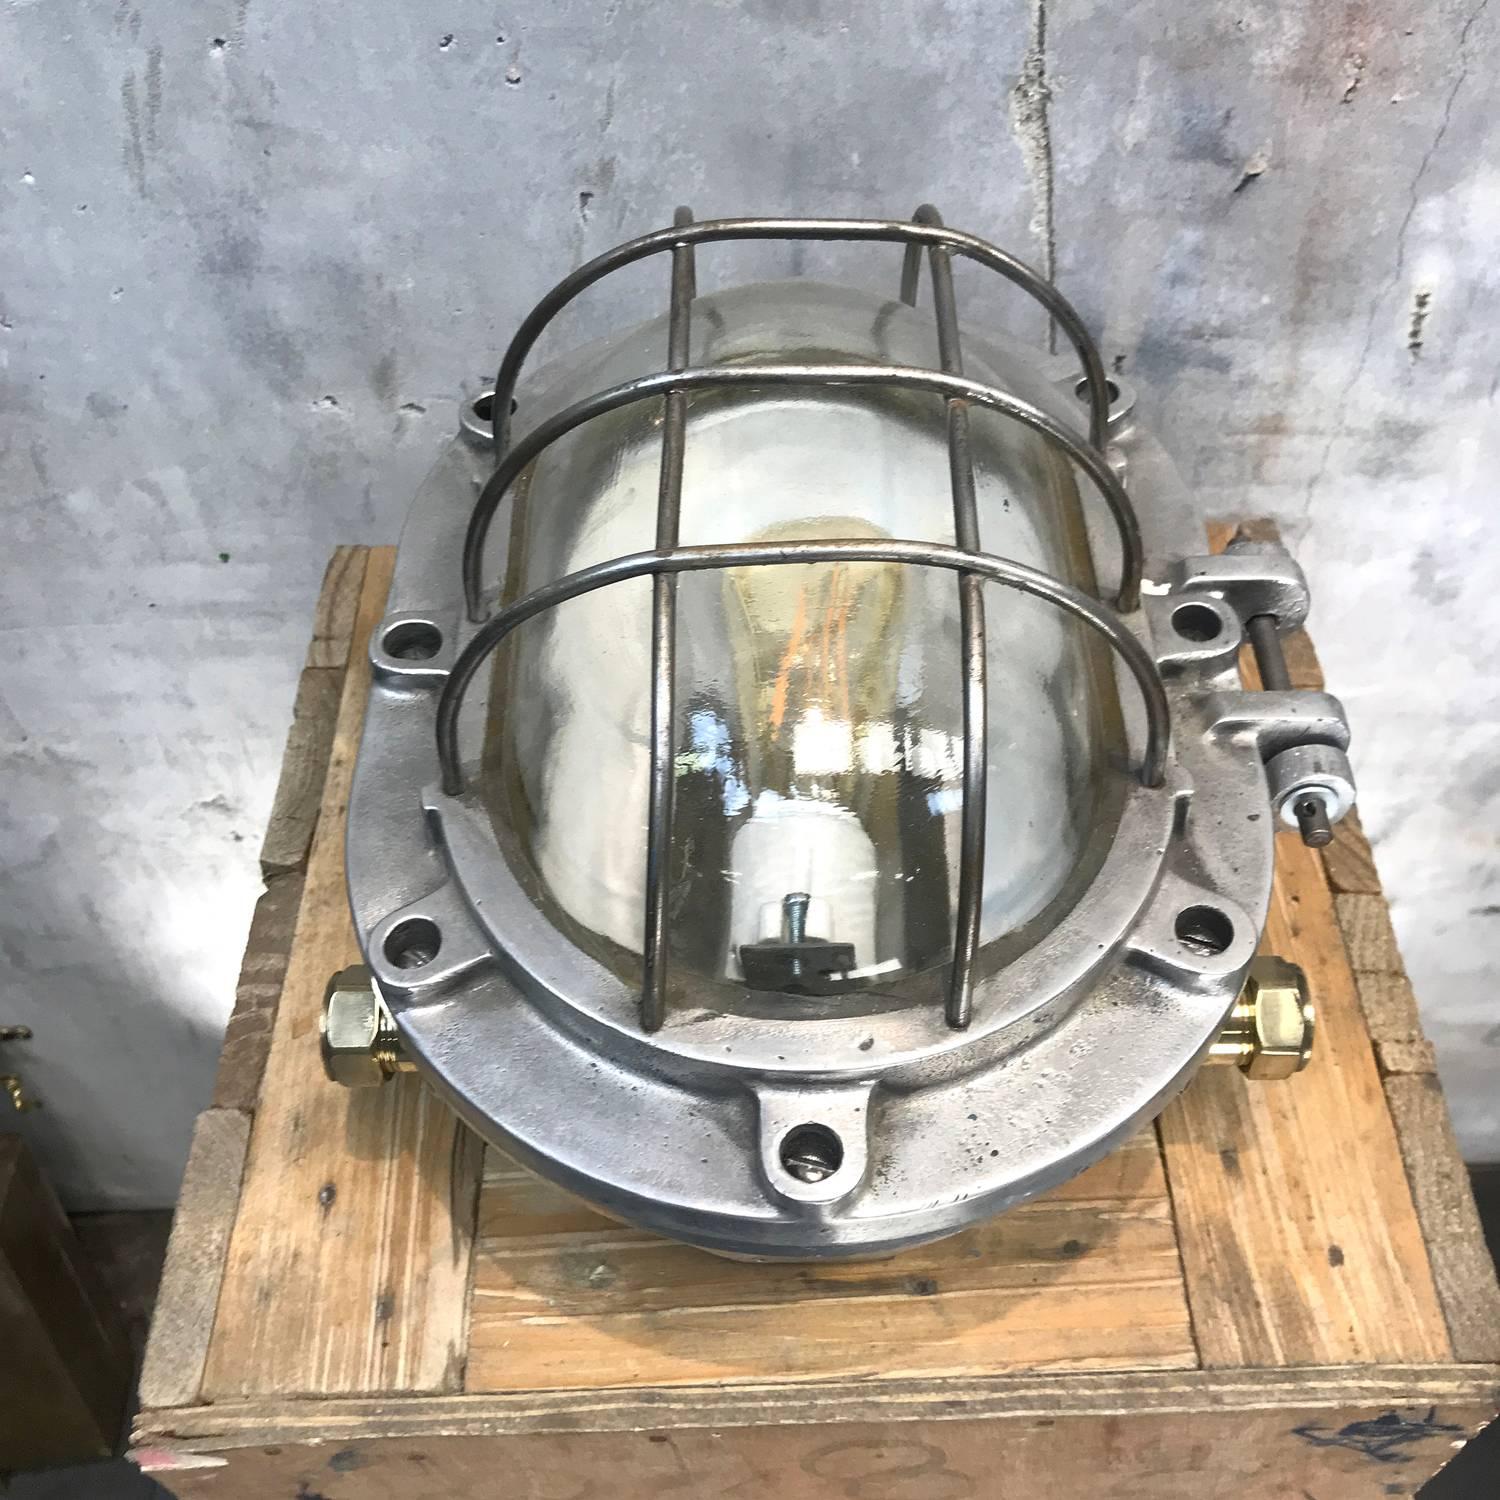 Extra large and extremely robust aluminium bulkhead lights reclaimed from super tankers built during the 1970s.

Built to last in the most harsh conditions and also suitable for use outdoors.

The main body is cast aluminium with tempered glass